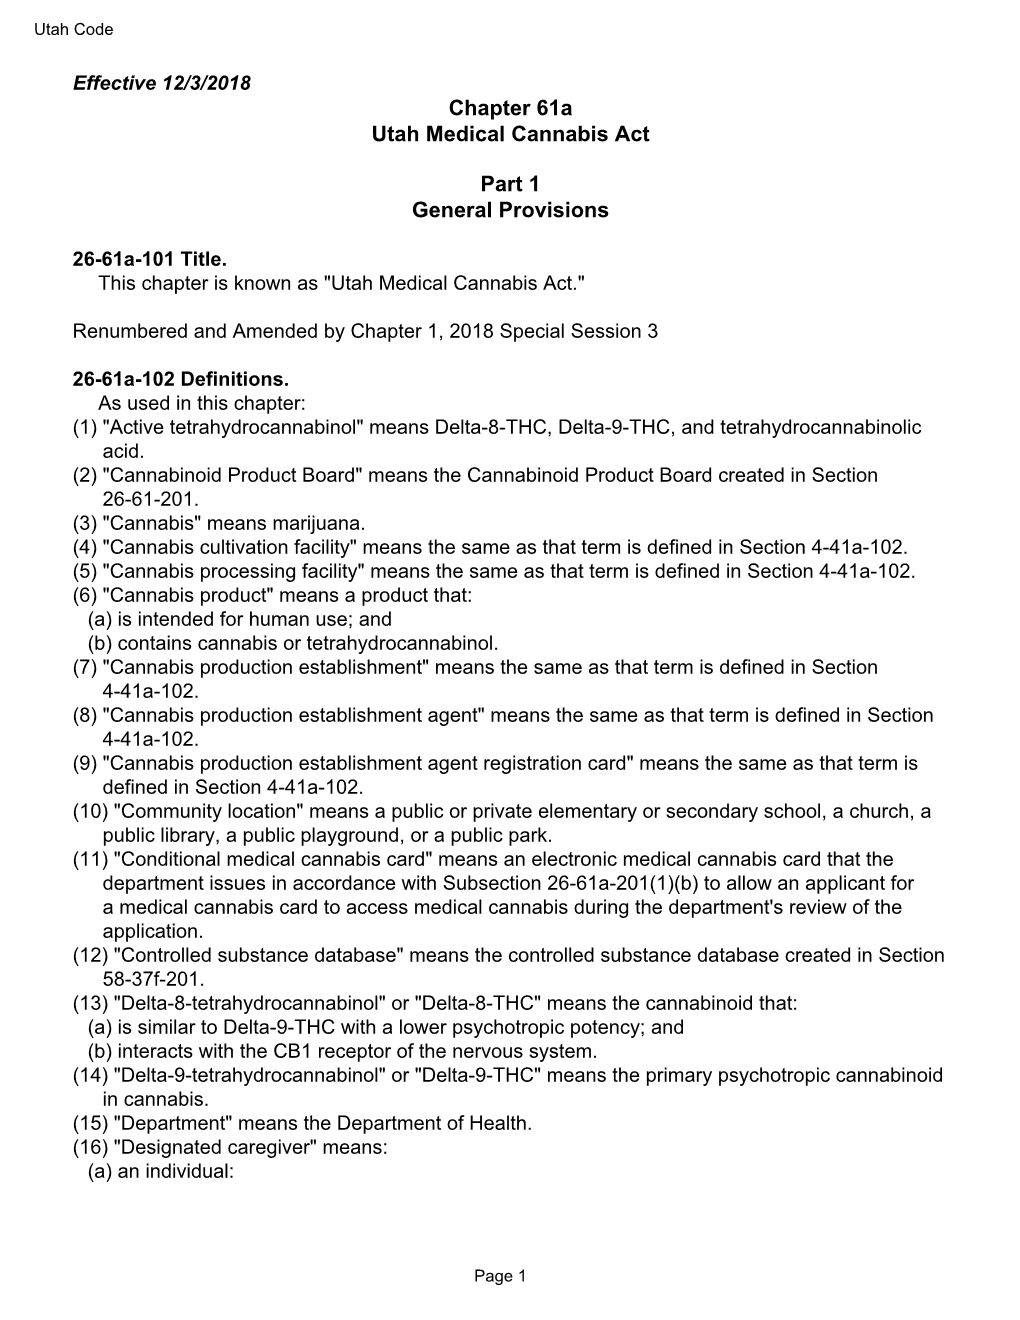 Chapter 61A Utah Medical Cannabis Act Part 1 General Provisions